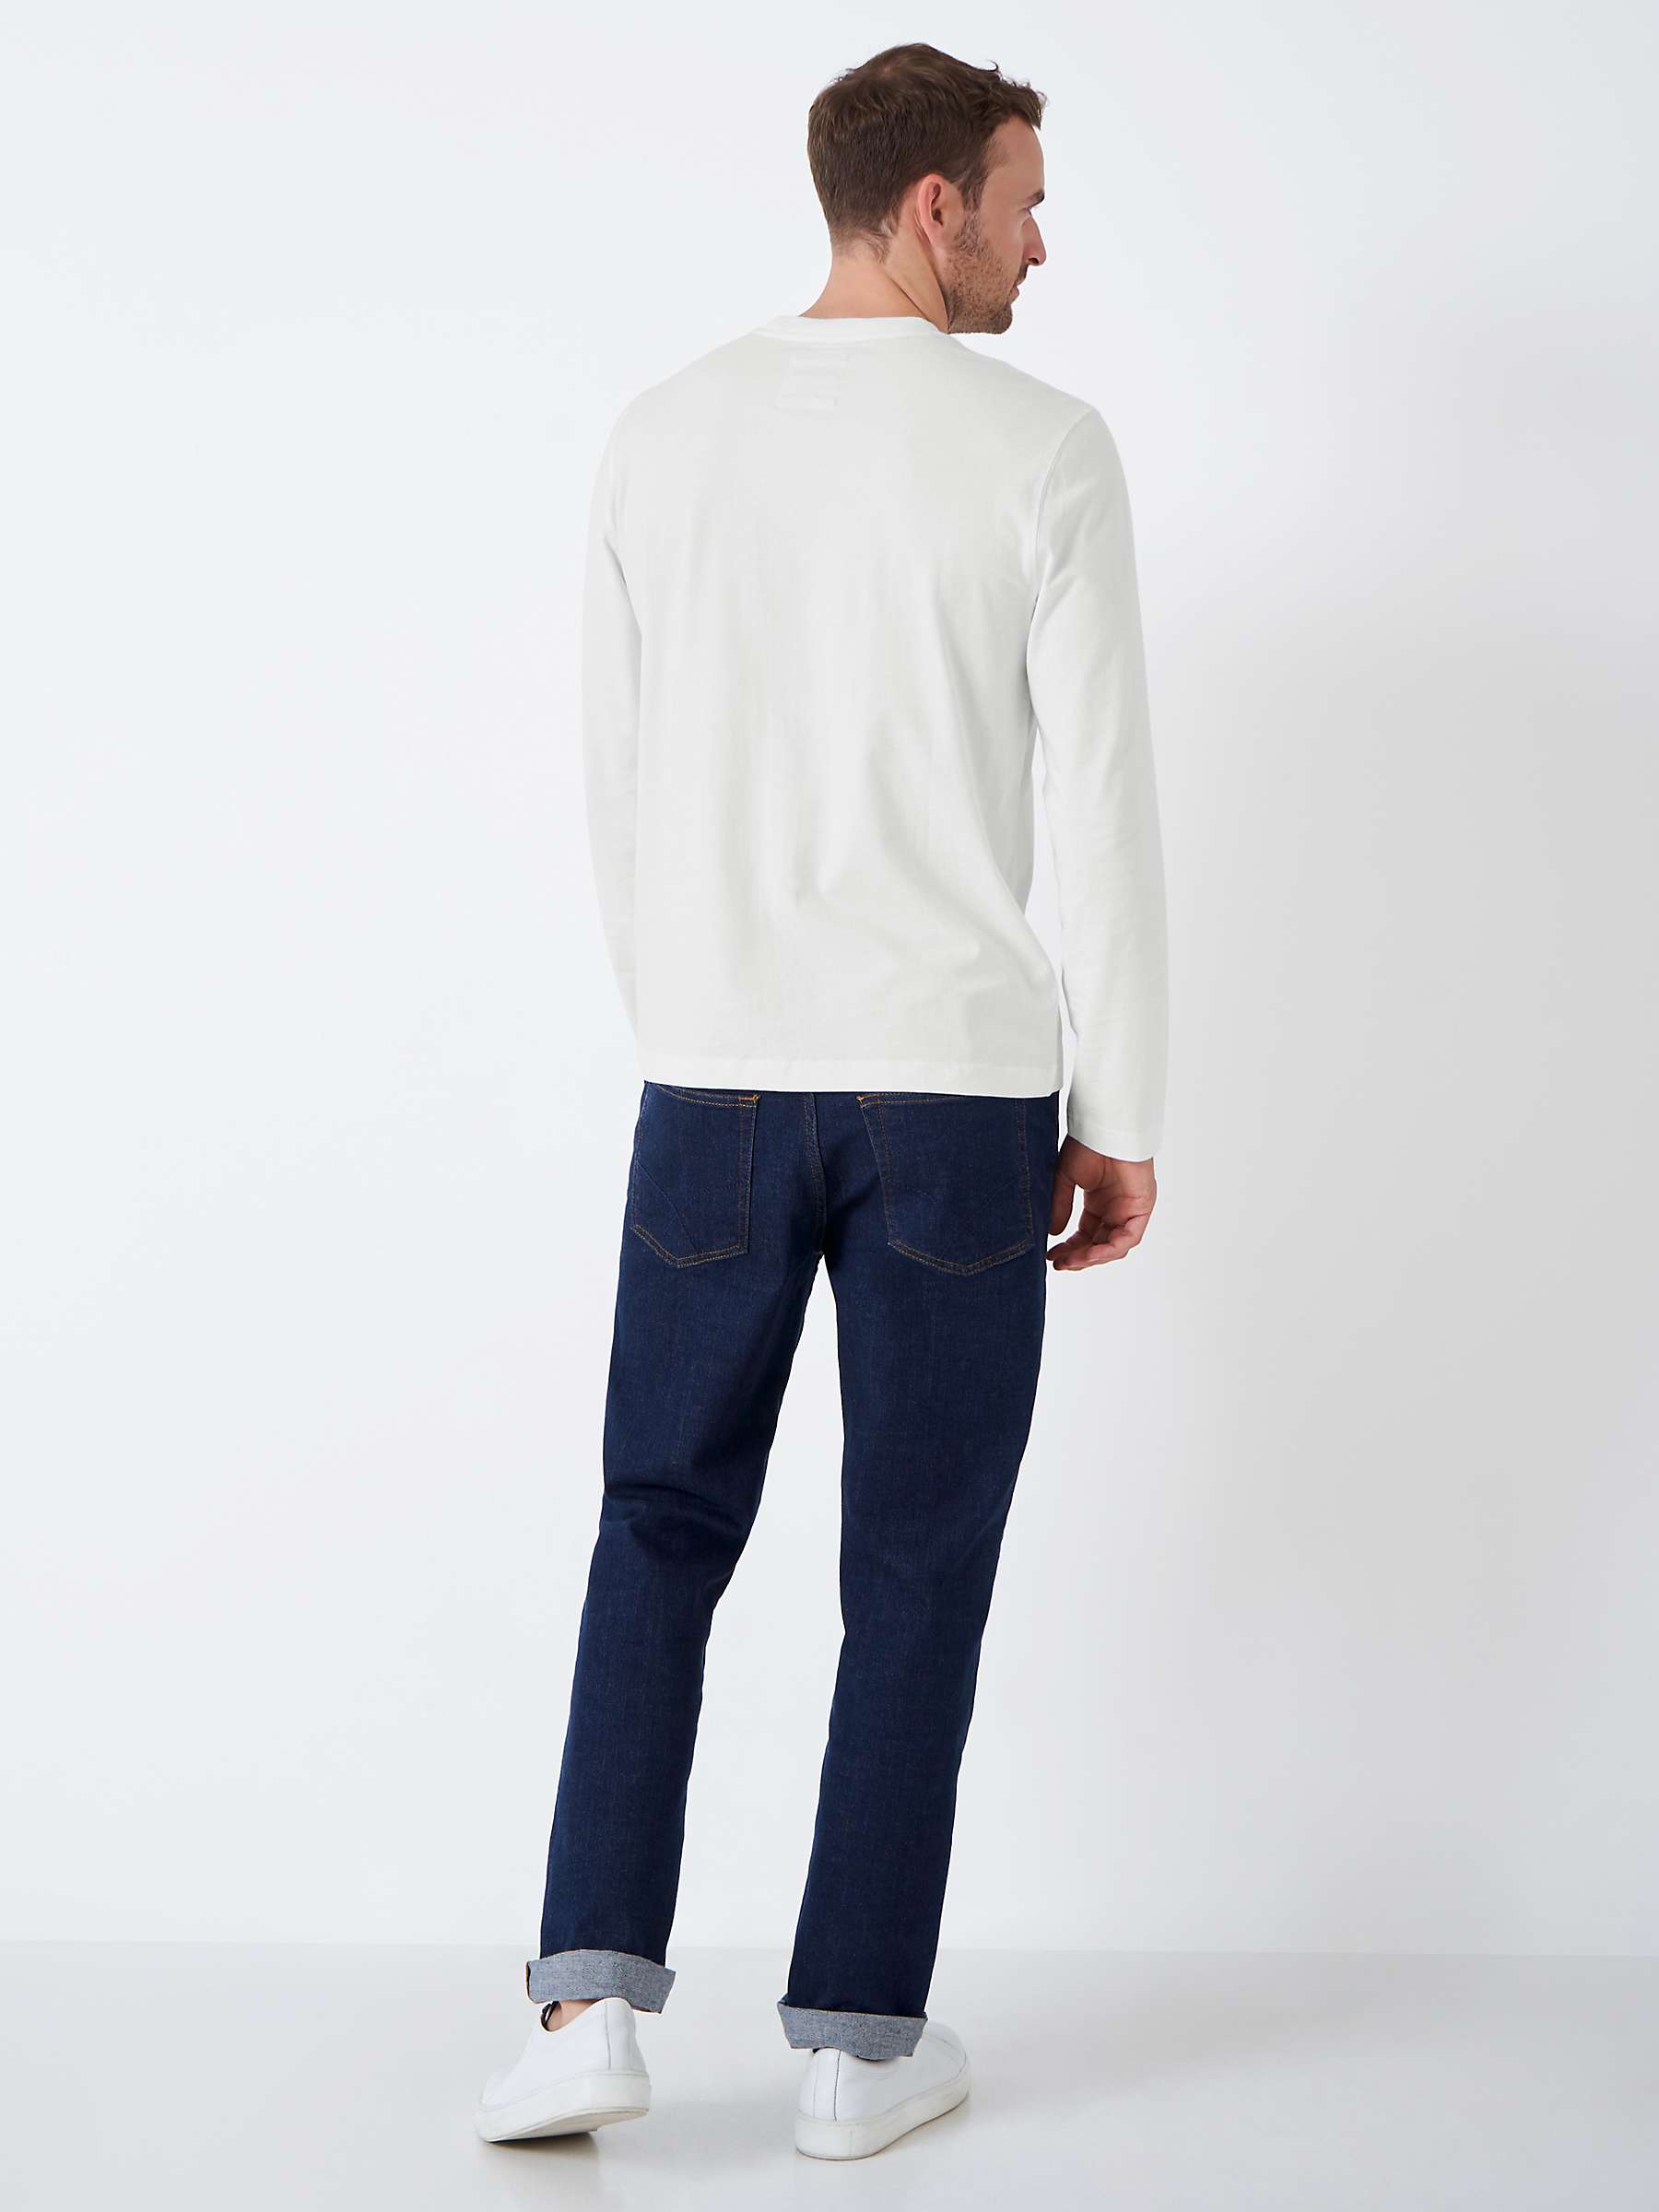 Buy Crew Clothing Long Sleeve T-Shirt Online at johnlewis.com